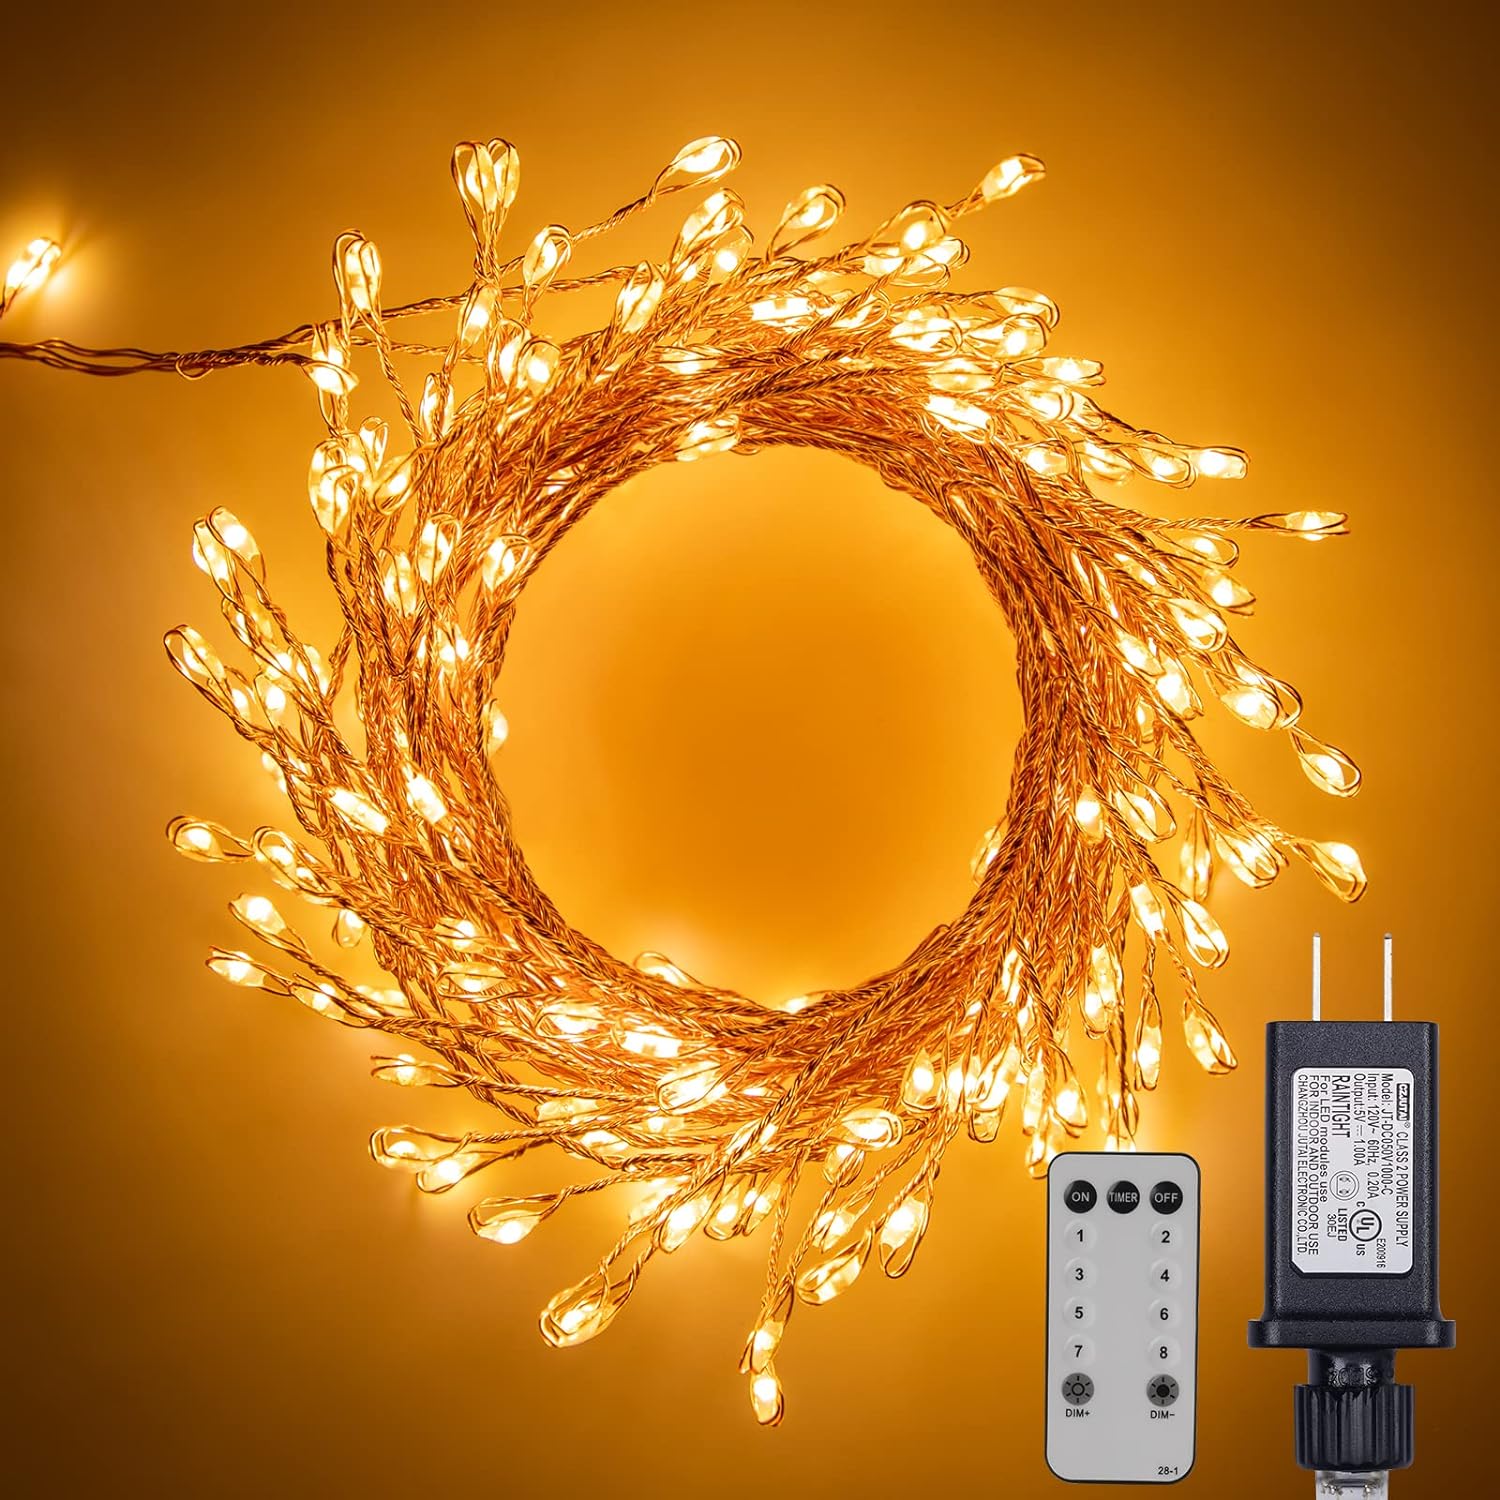 10Feet Battery Operated Fairy Lights, 120LEDs Firecracker String Lights Waterproof Silver Wire Starry Firefly Lights for DIY Wreath Home Weeding Indoor Outdoor Christmas Decorations, Warm White